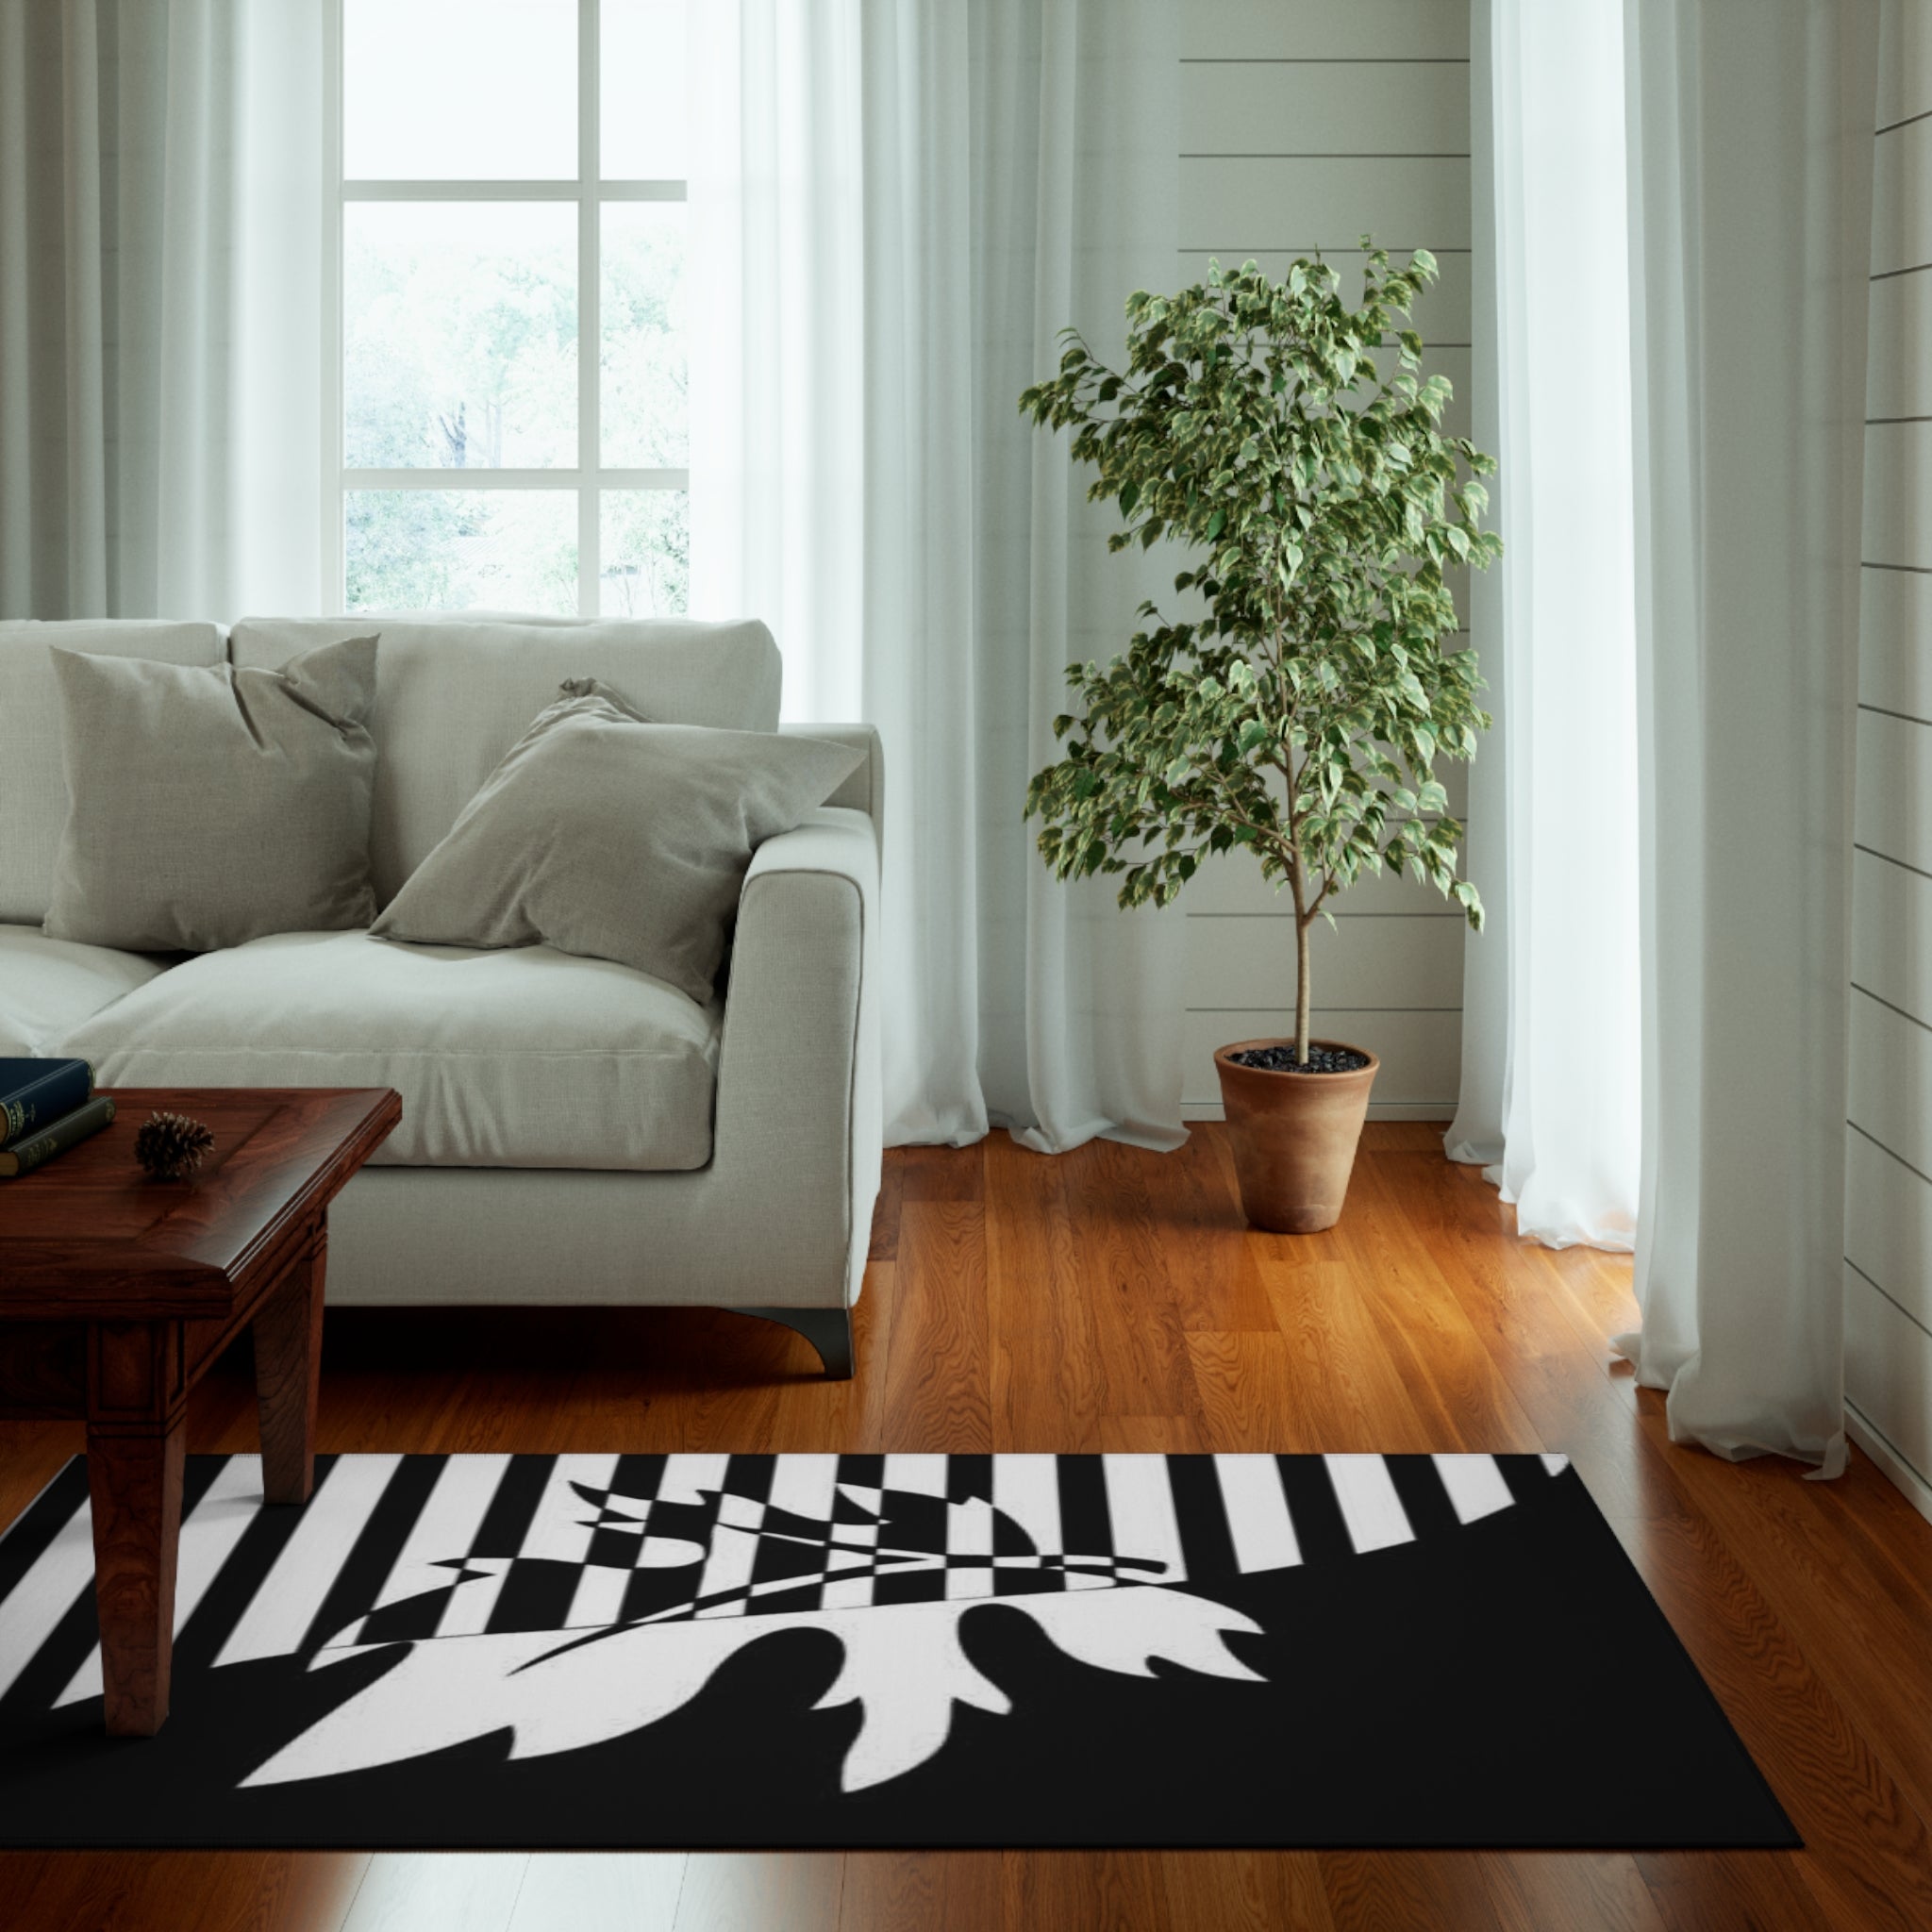 Dornier Rug black and white Home-clothes-jewelry